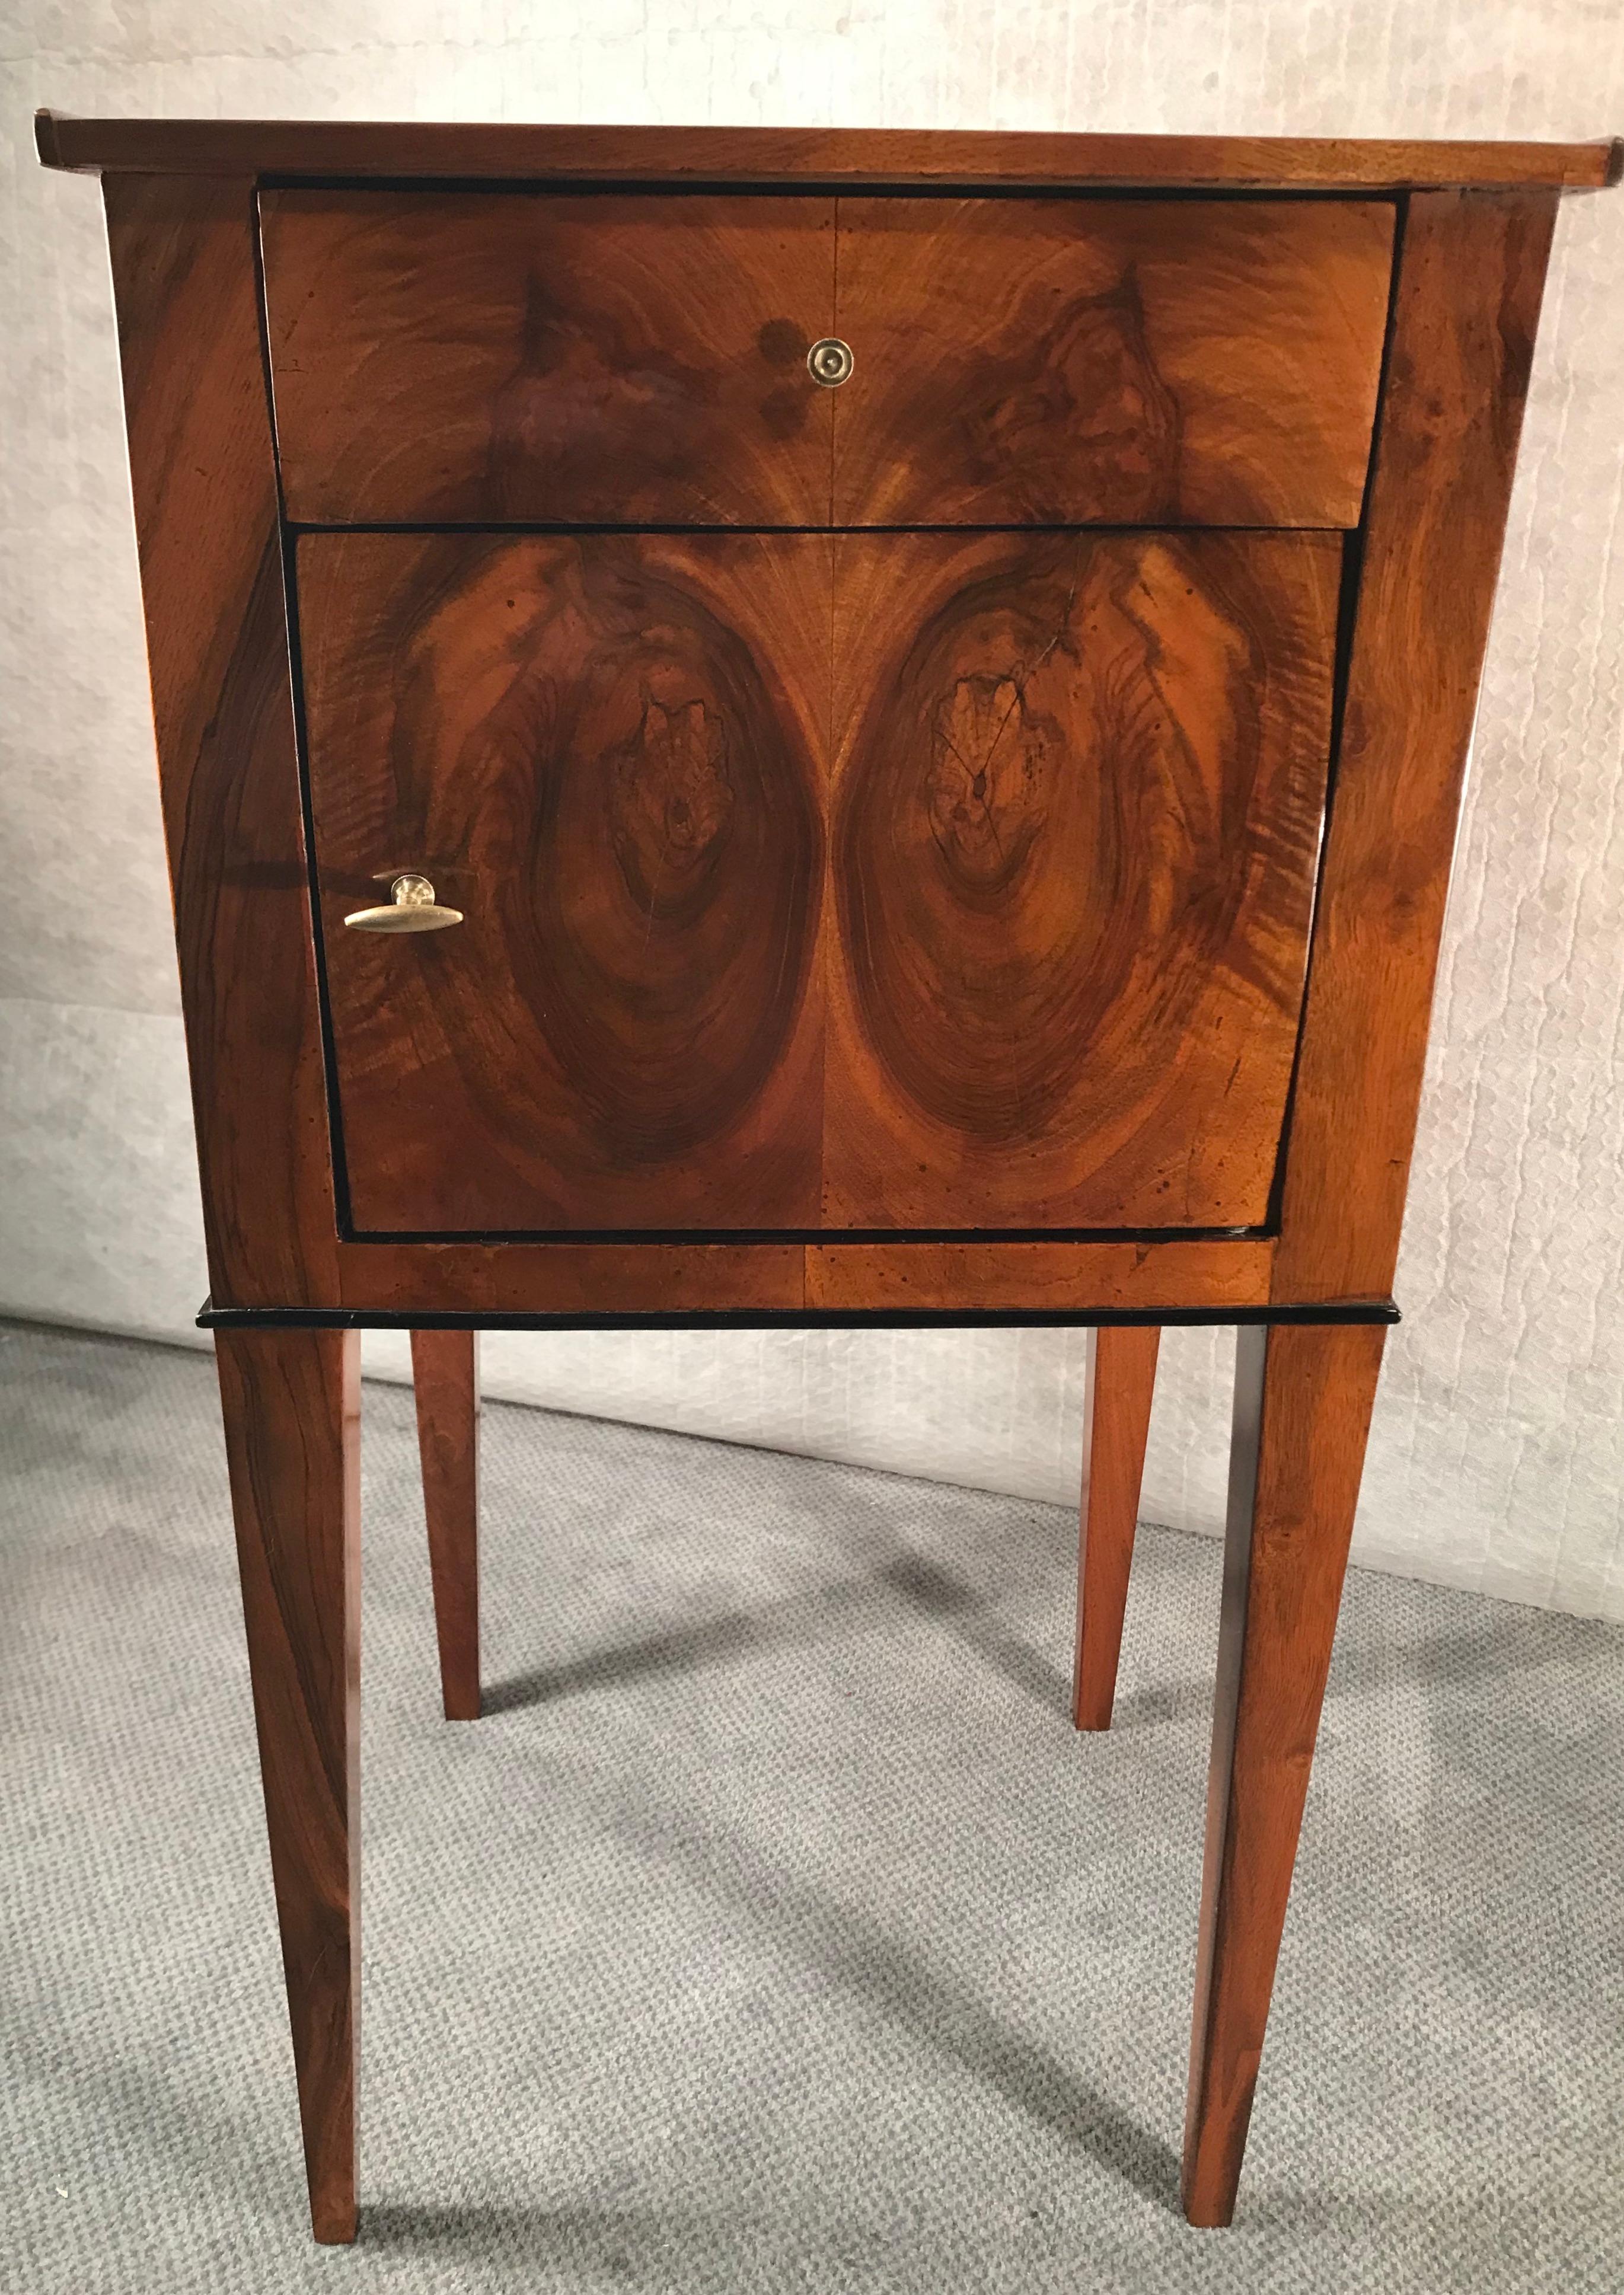 Biedermeier cabinet, South German 1810. Small cabinet or nightstand of the Biedermeier period. The cabinet has a beautiful walnut veneer. It stands on high legs and has one door and one drawer. 
It does not have to be placed against a wall because